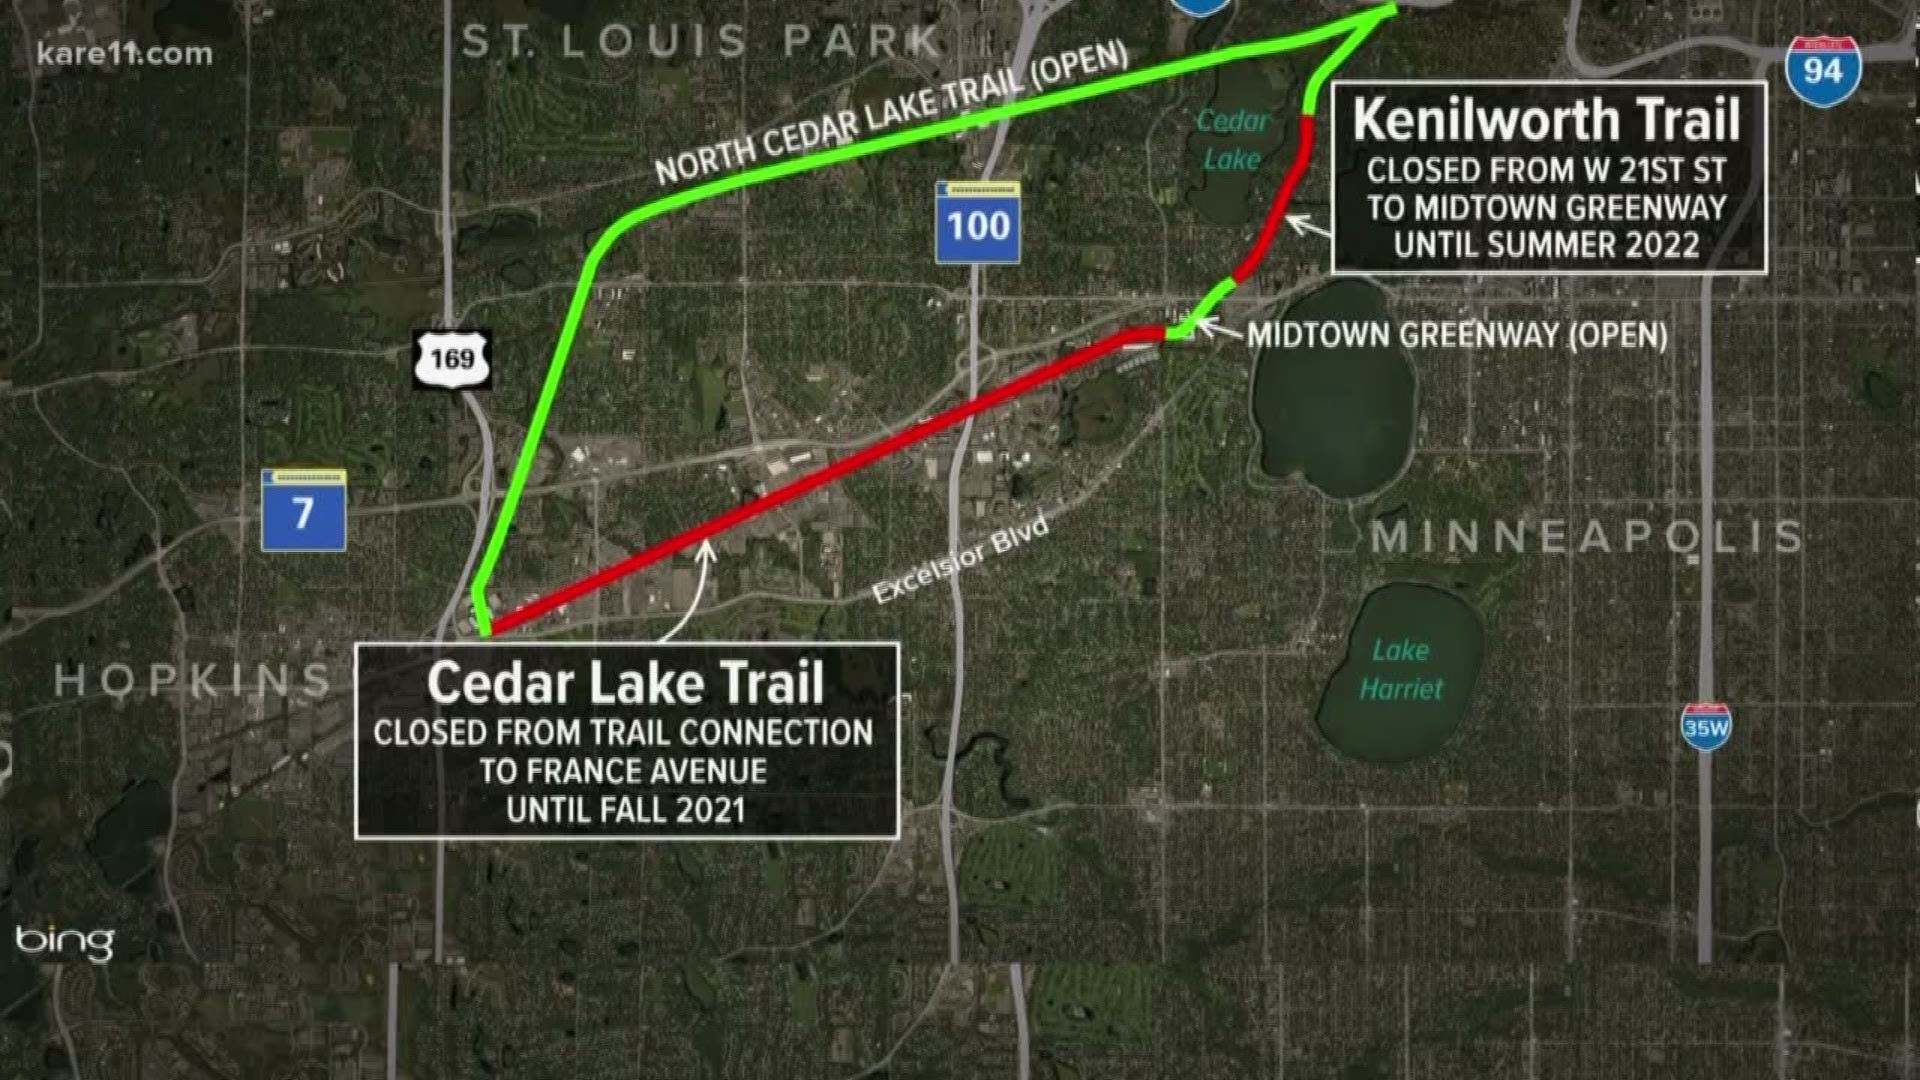 The Cedar Lake Trail and Kenilworth Trail close May 13, and will remain closed for two to three years.